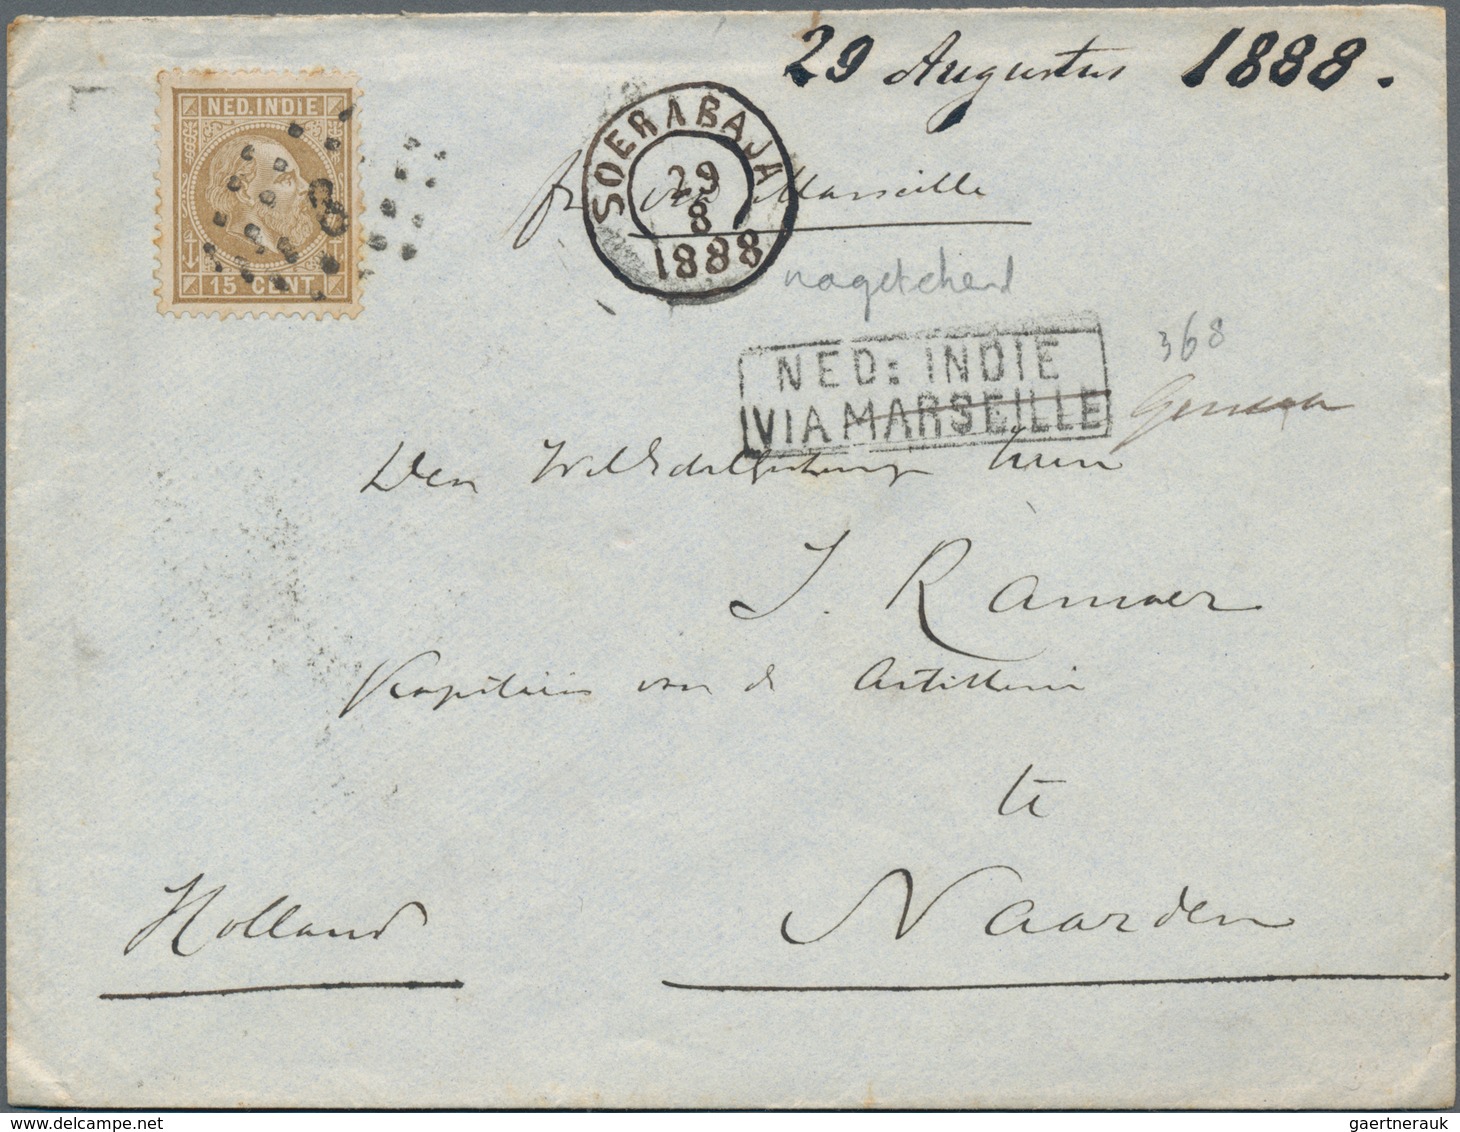 Niederländisch-Indien: 1820/1956, useful lot of 23 covers and cards including two or three fronts co